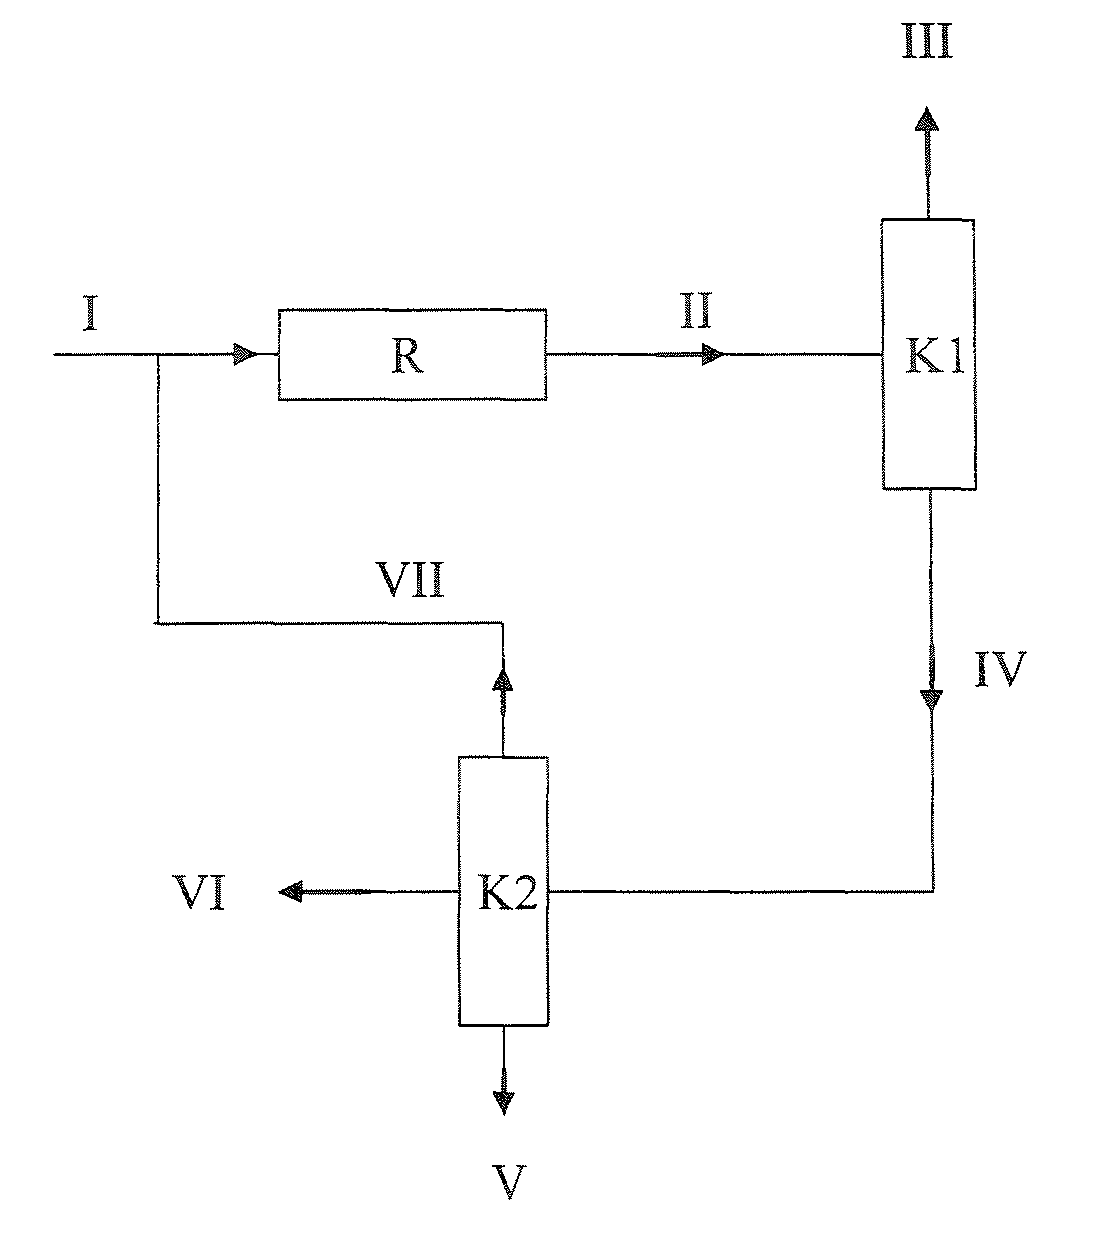 Process for the dissociation of MTBE